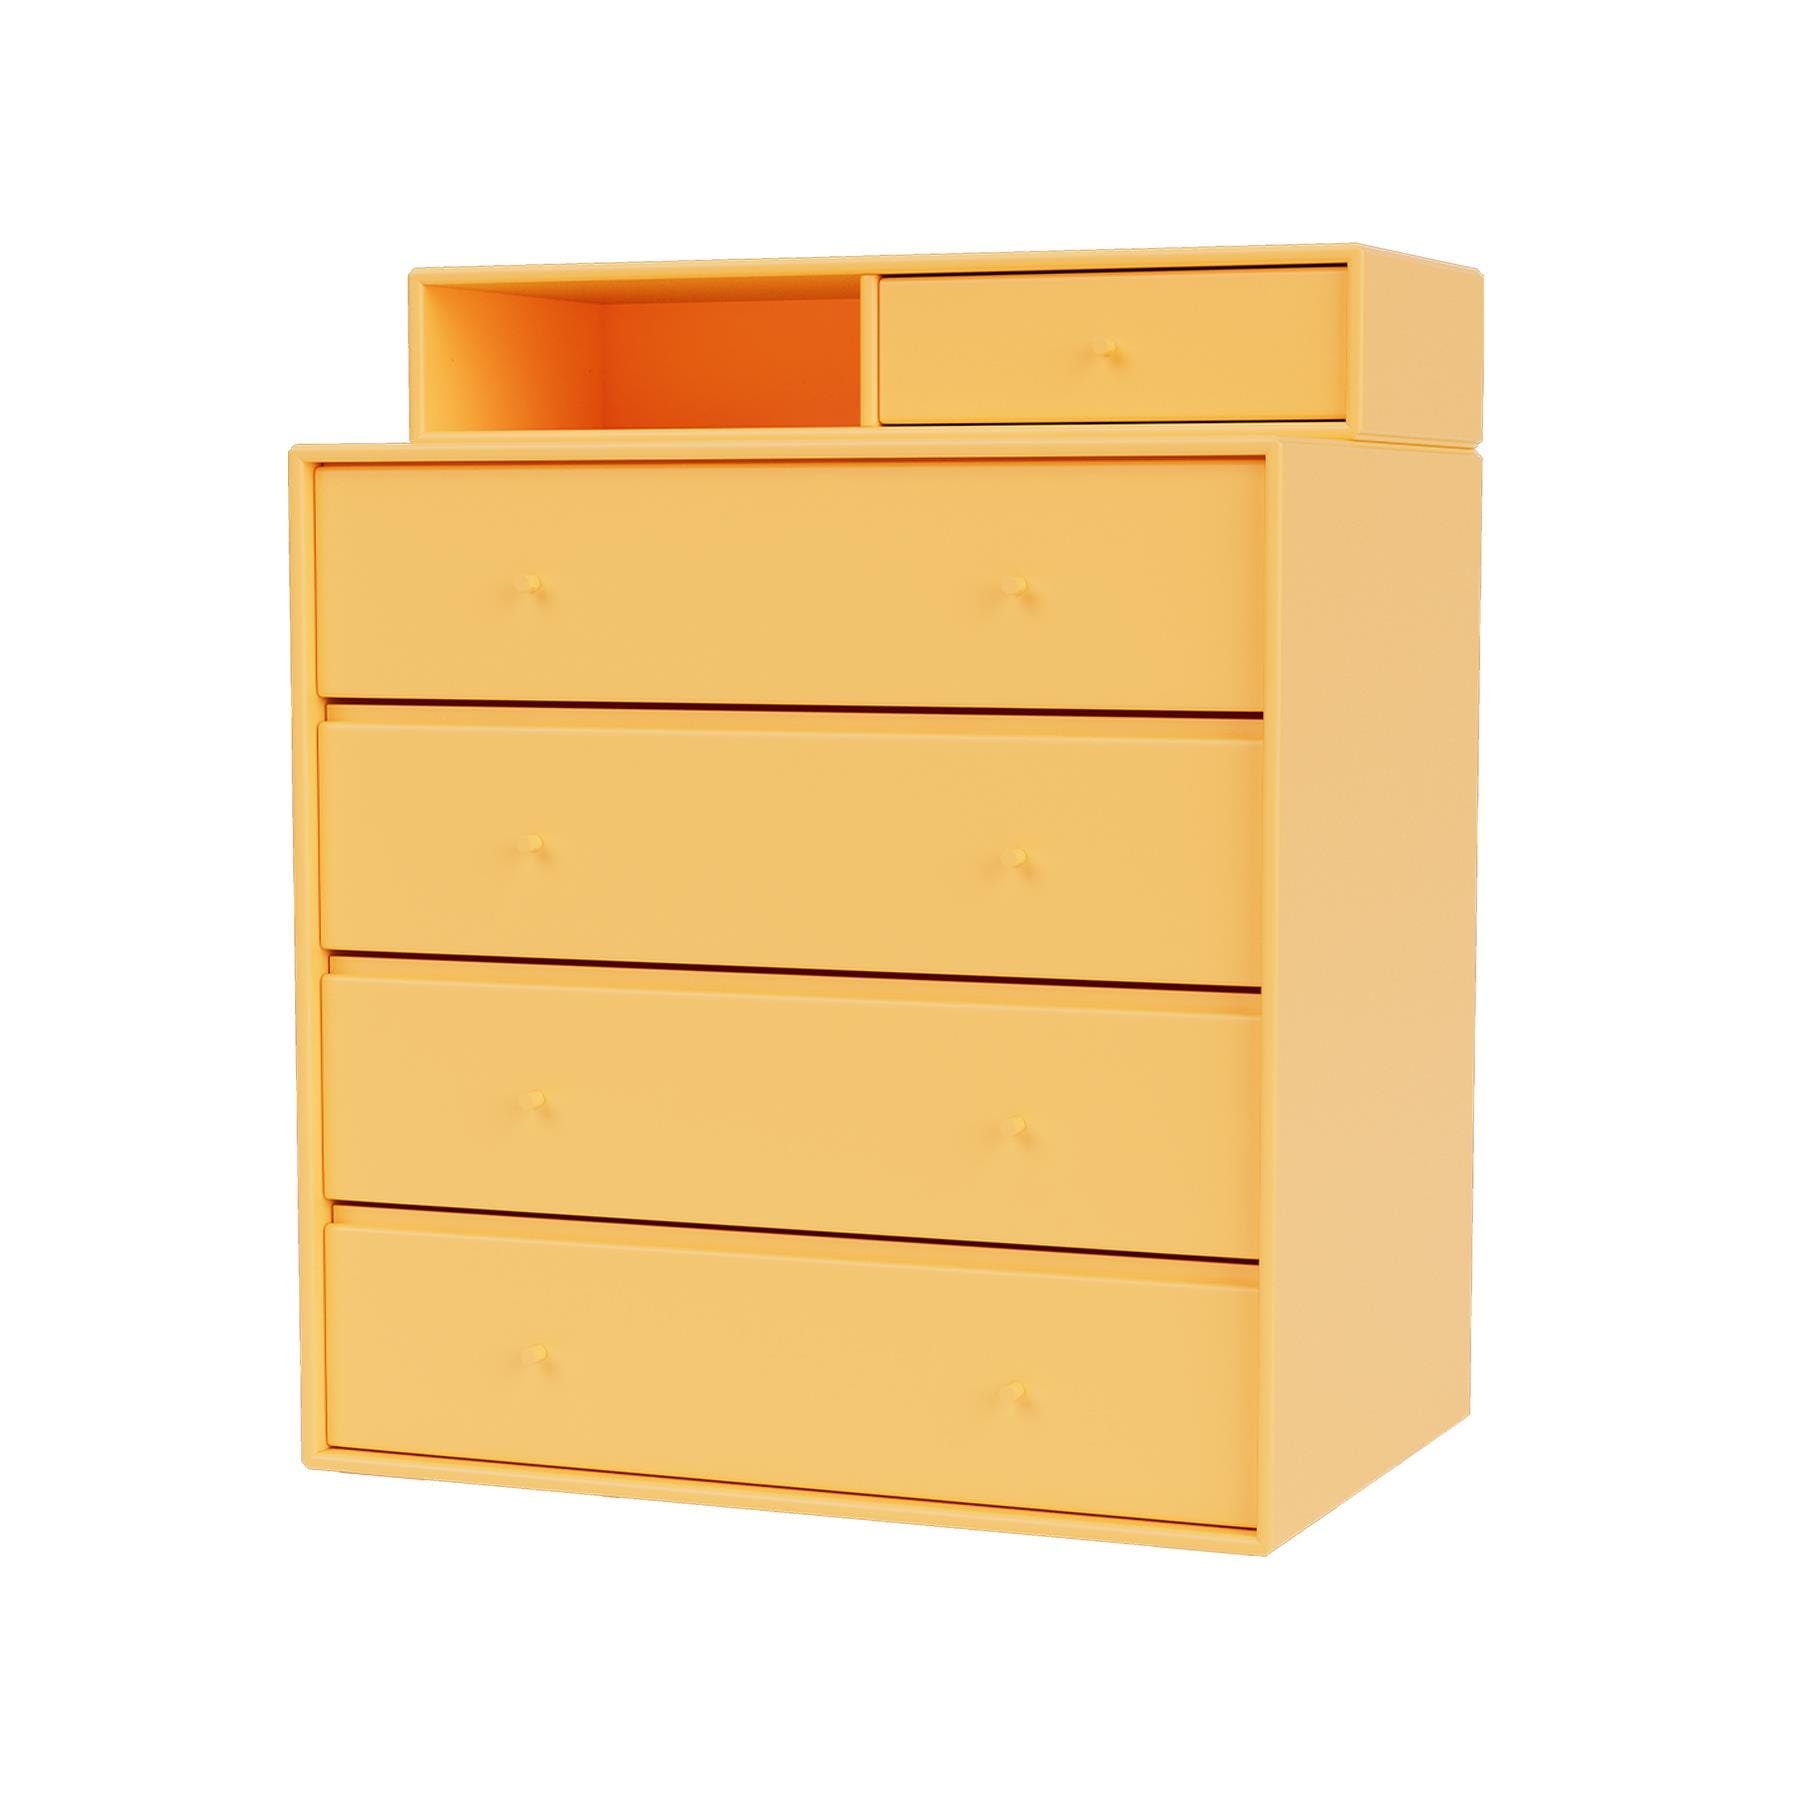 Montana Keep Chest Of Drawers Acacia Wall Mounted Yellow Designer Furniture From Holloways Of Ludlow